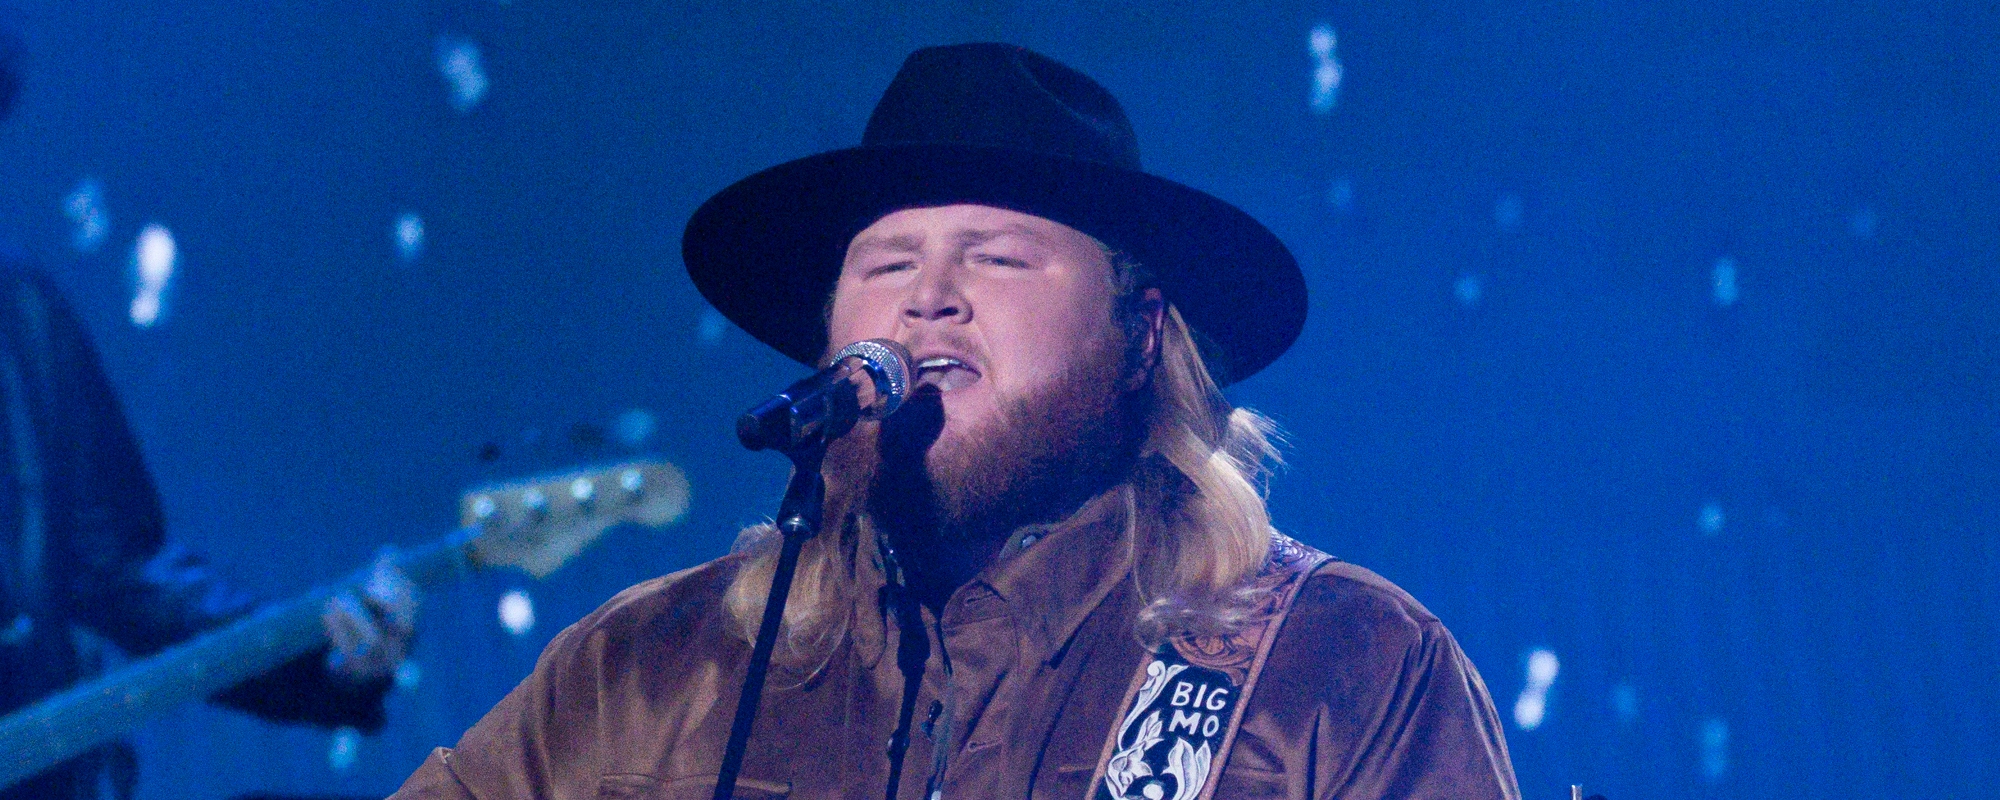 Will Moseley Delivers Soulful Performance on the 'American Idol' Stage With"Good Book Bad"